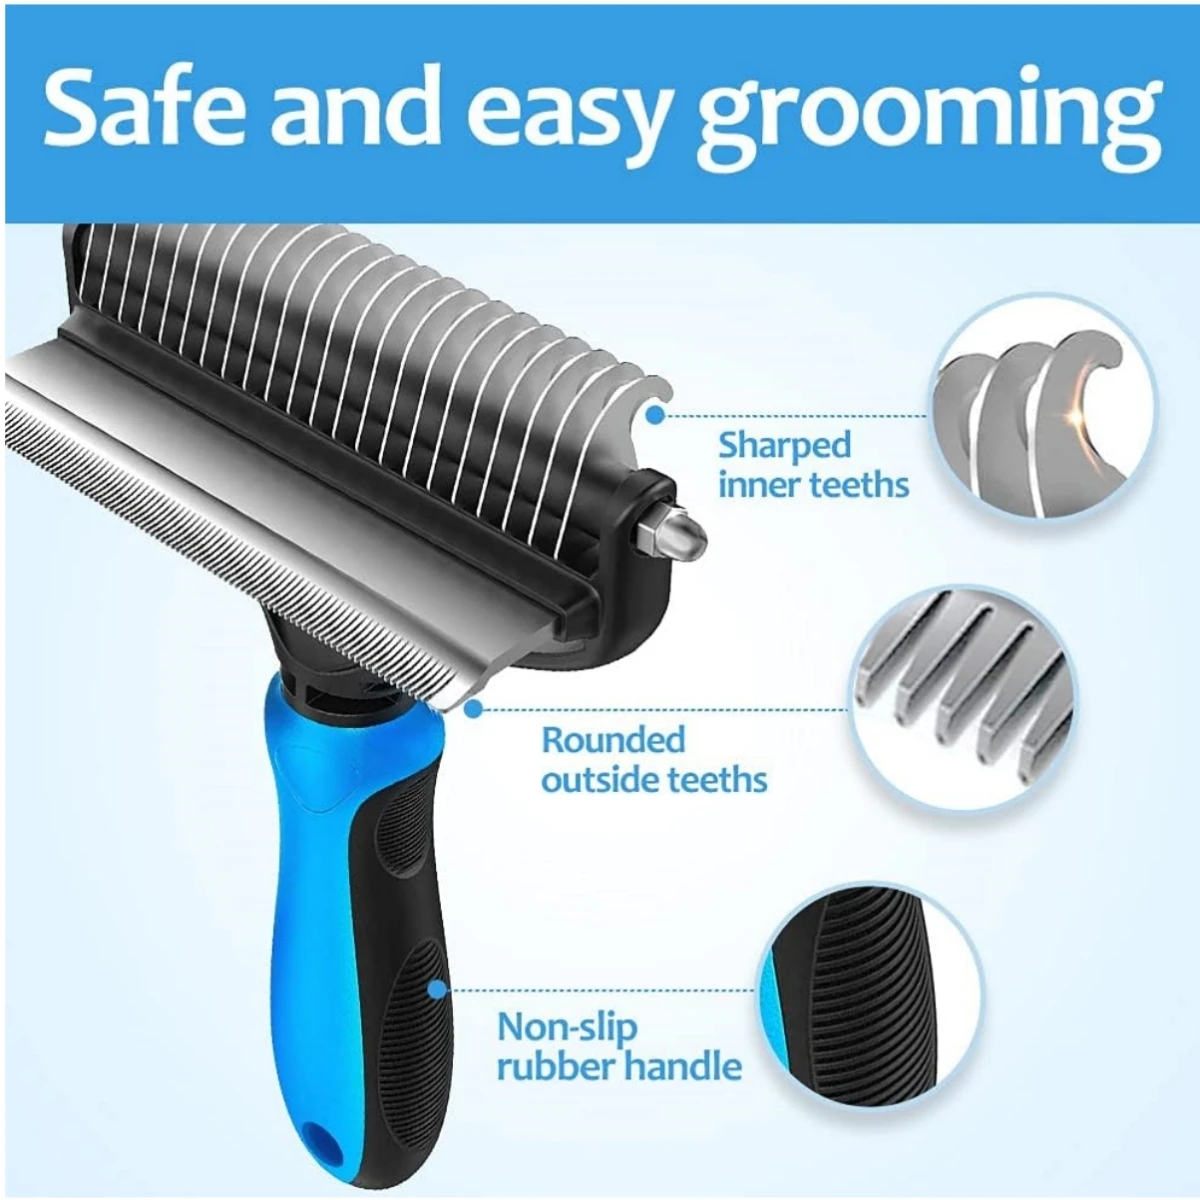 

New Hair Removal Comb for Dogs Cat Detangler Fur Trimming Dematting Brush Grooming Tool For matted Long Hair Curly Pet